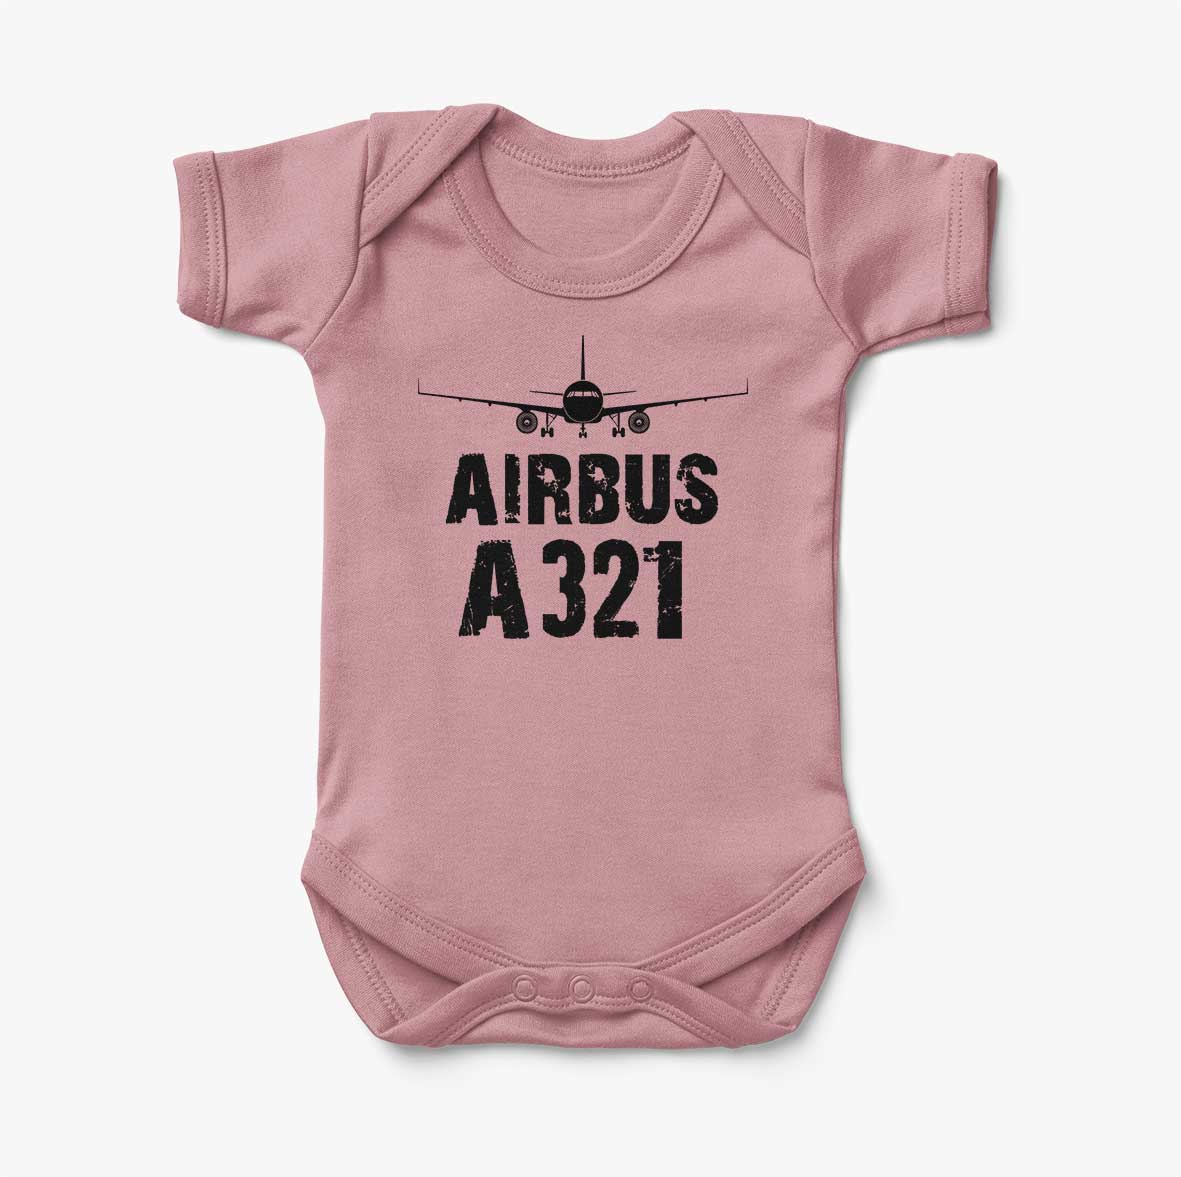 Airbus A321 & Plane Designed Baby Bodysuits